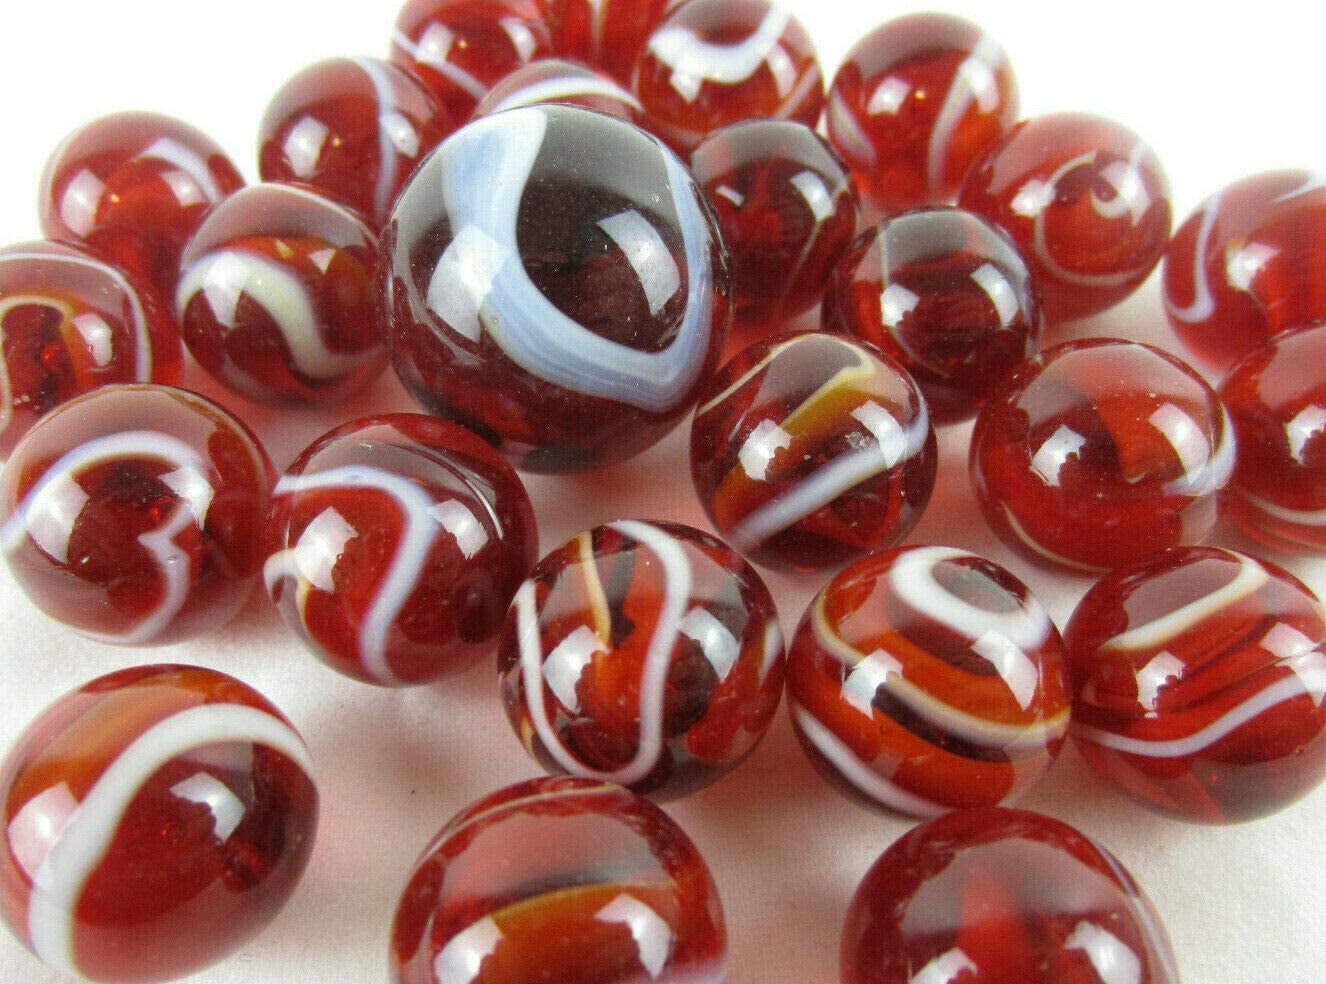 16mm "Rooster" Translucent Red w White Glass Player Marbles Pack of 5 w/Stands 